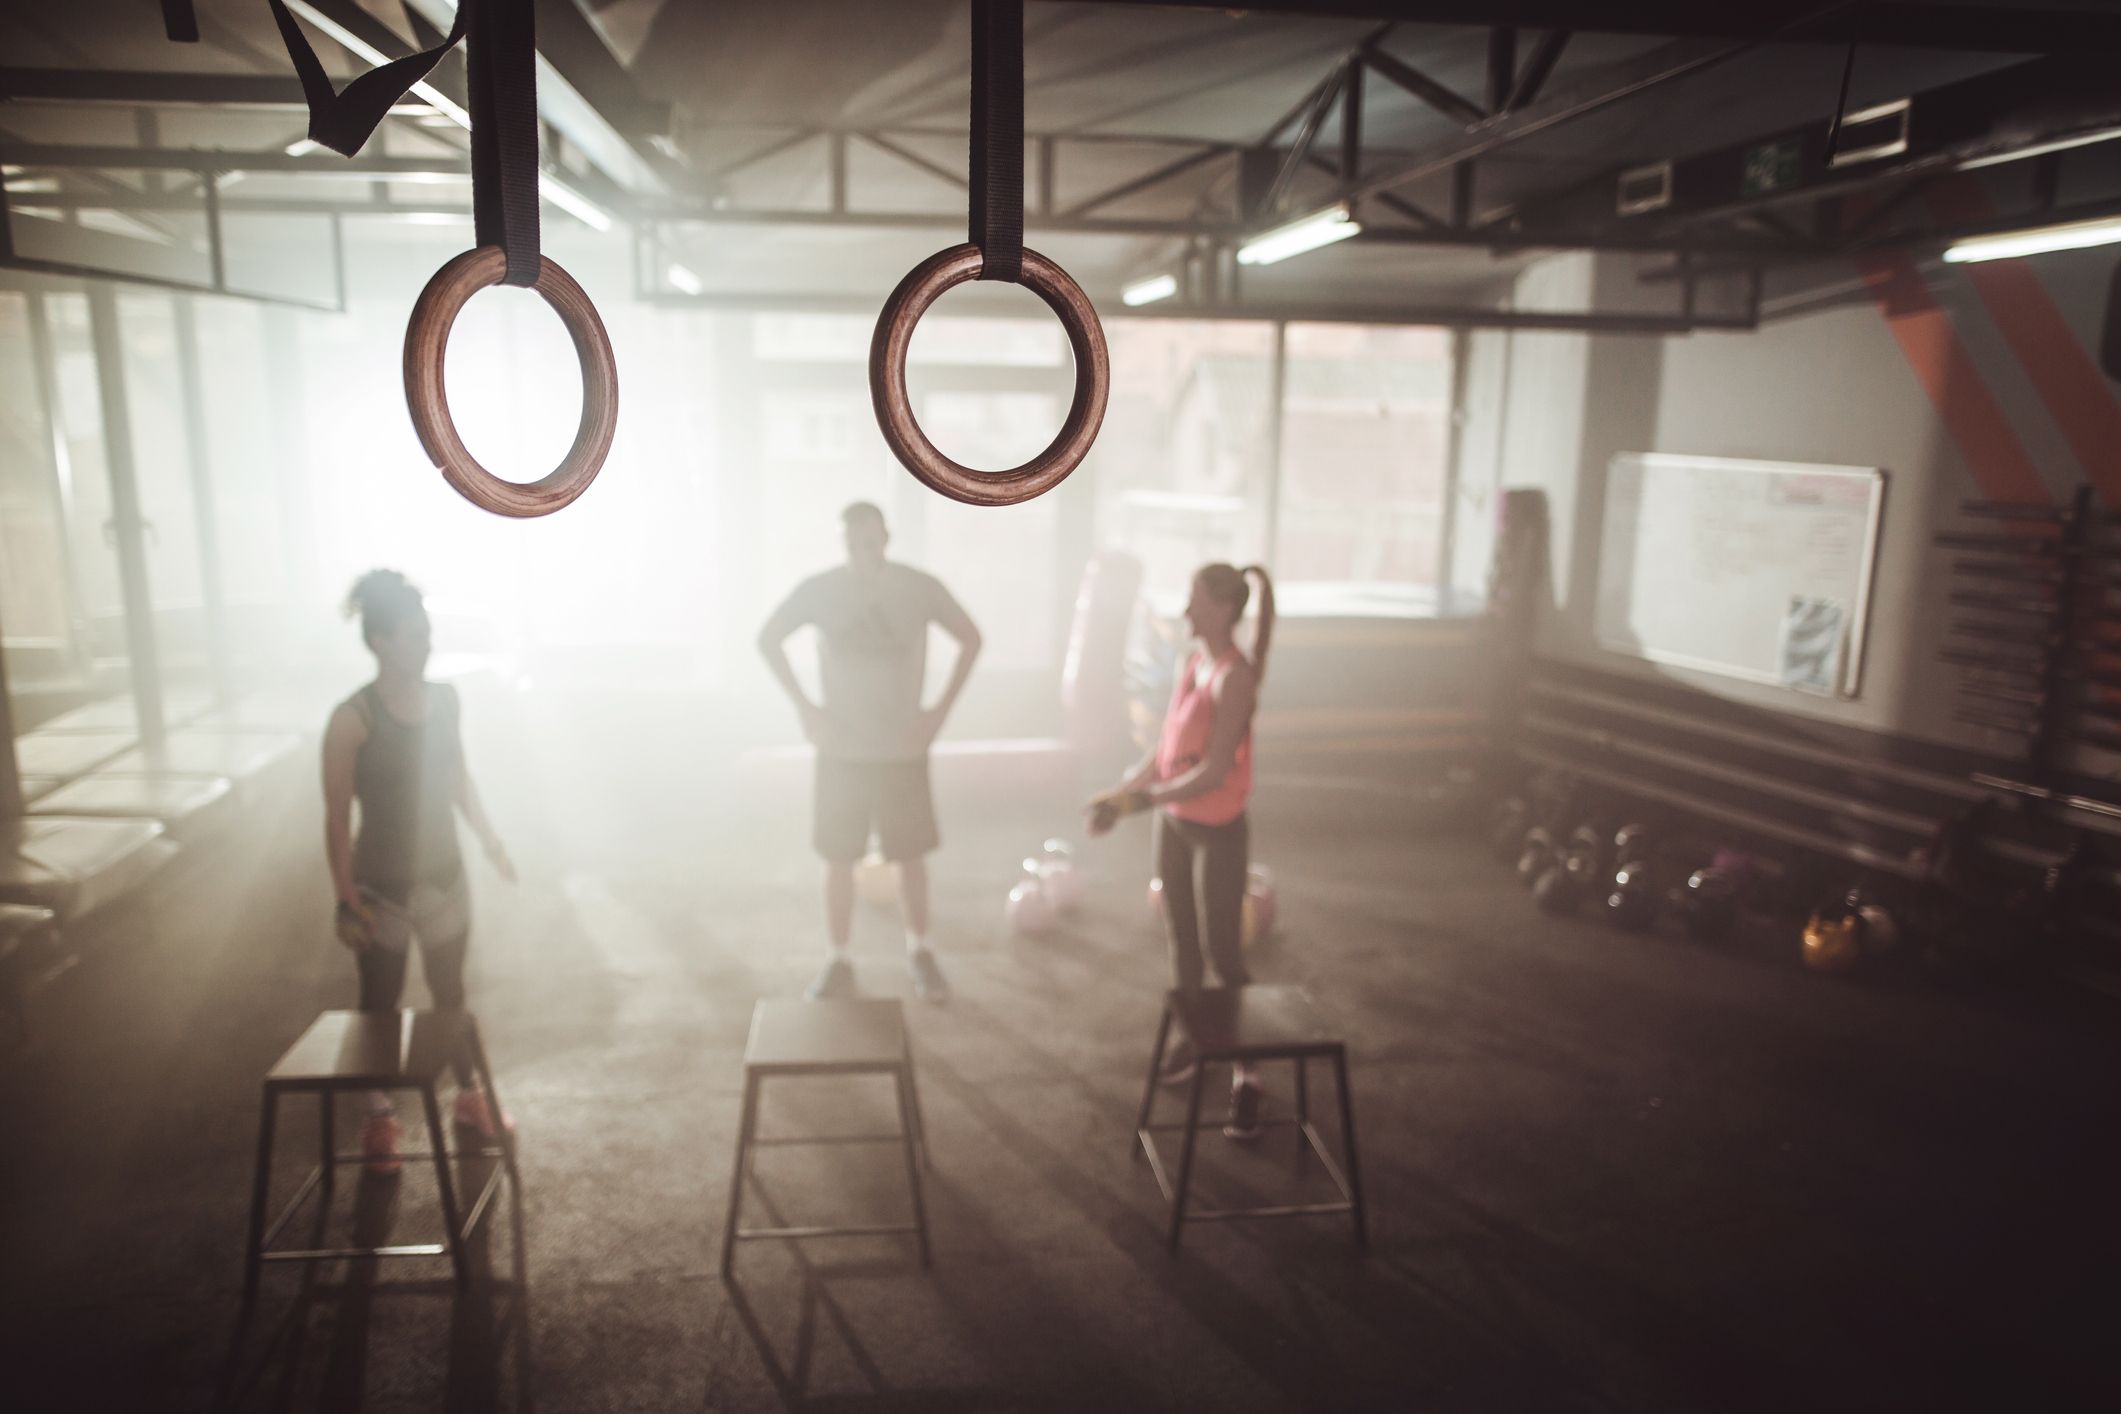 Wiping Benches and Re-Racking Weights: 7 Things All Good Gym-goers Do Every  Day